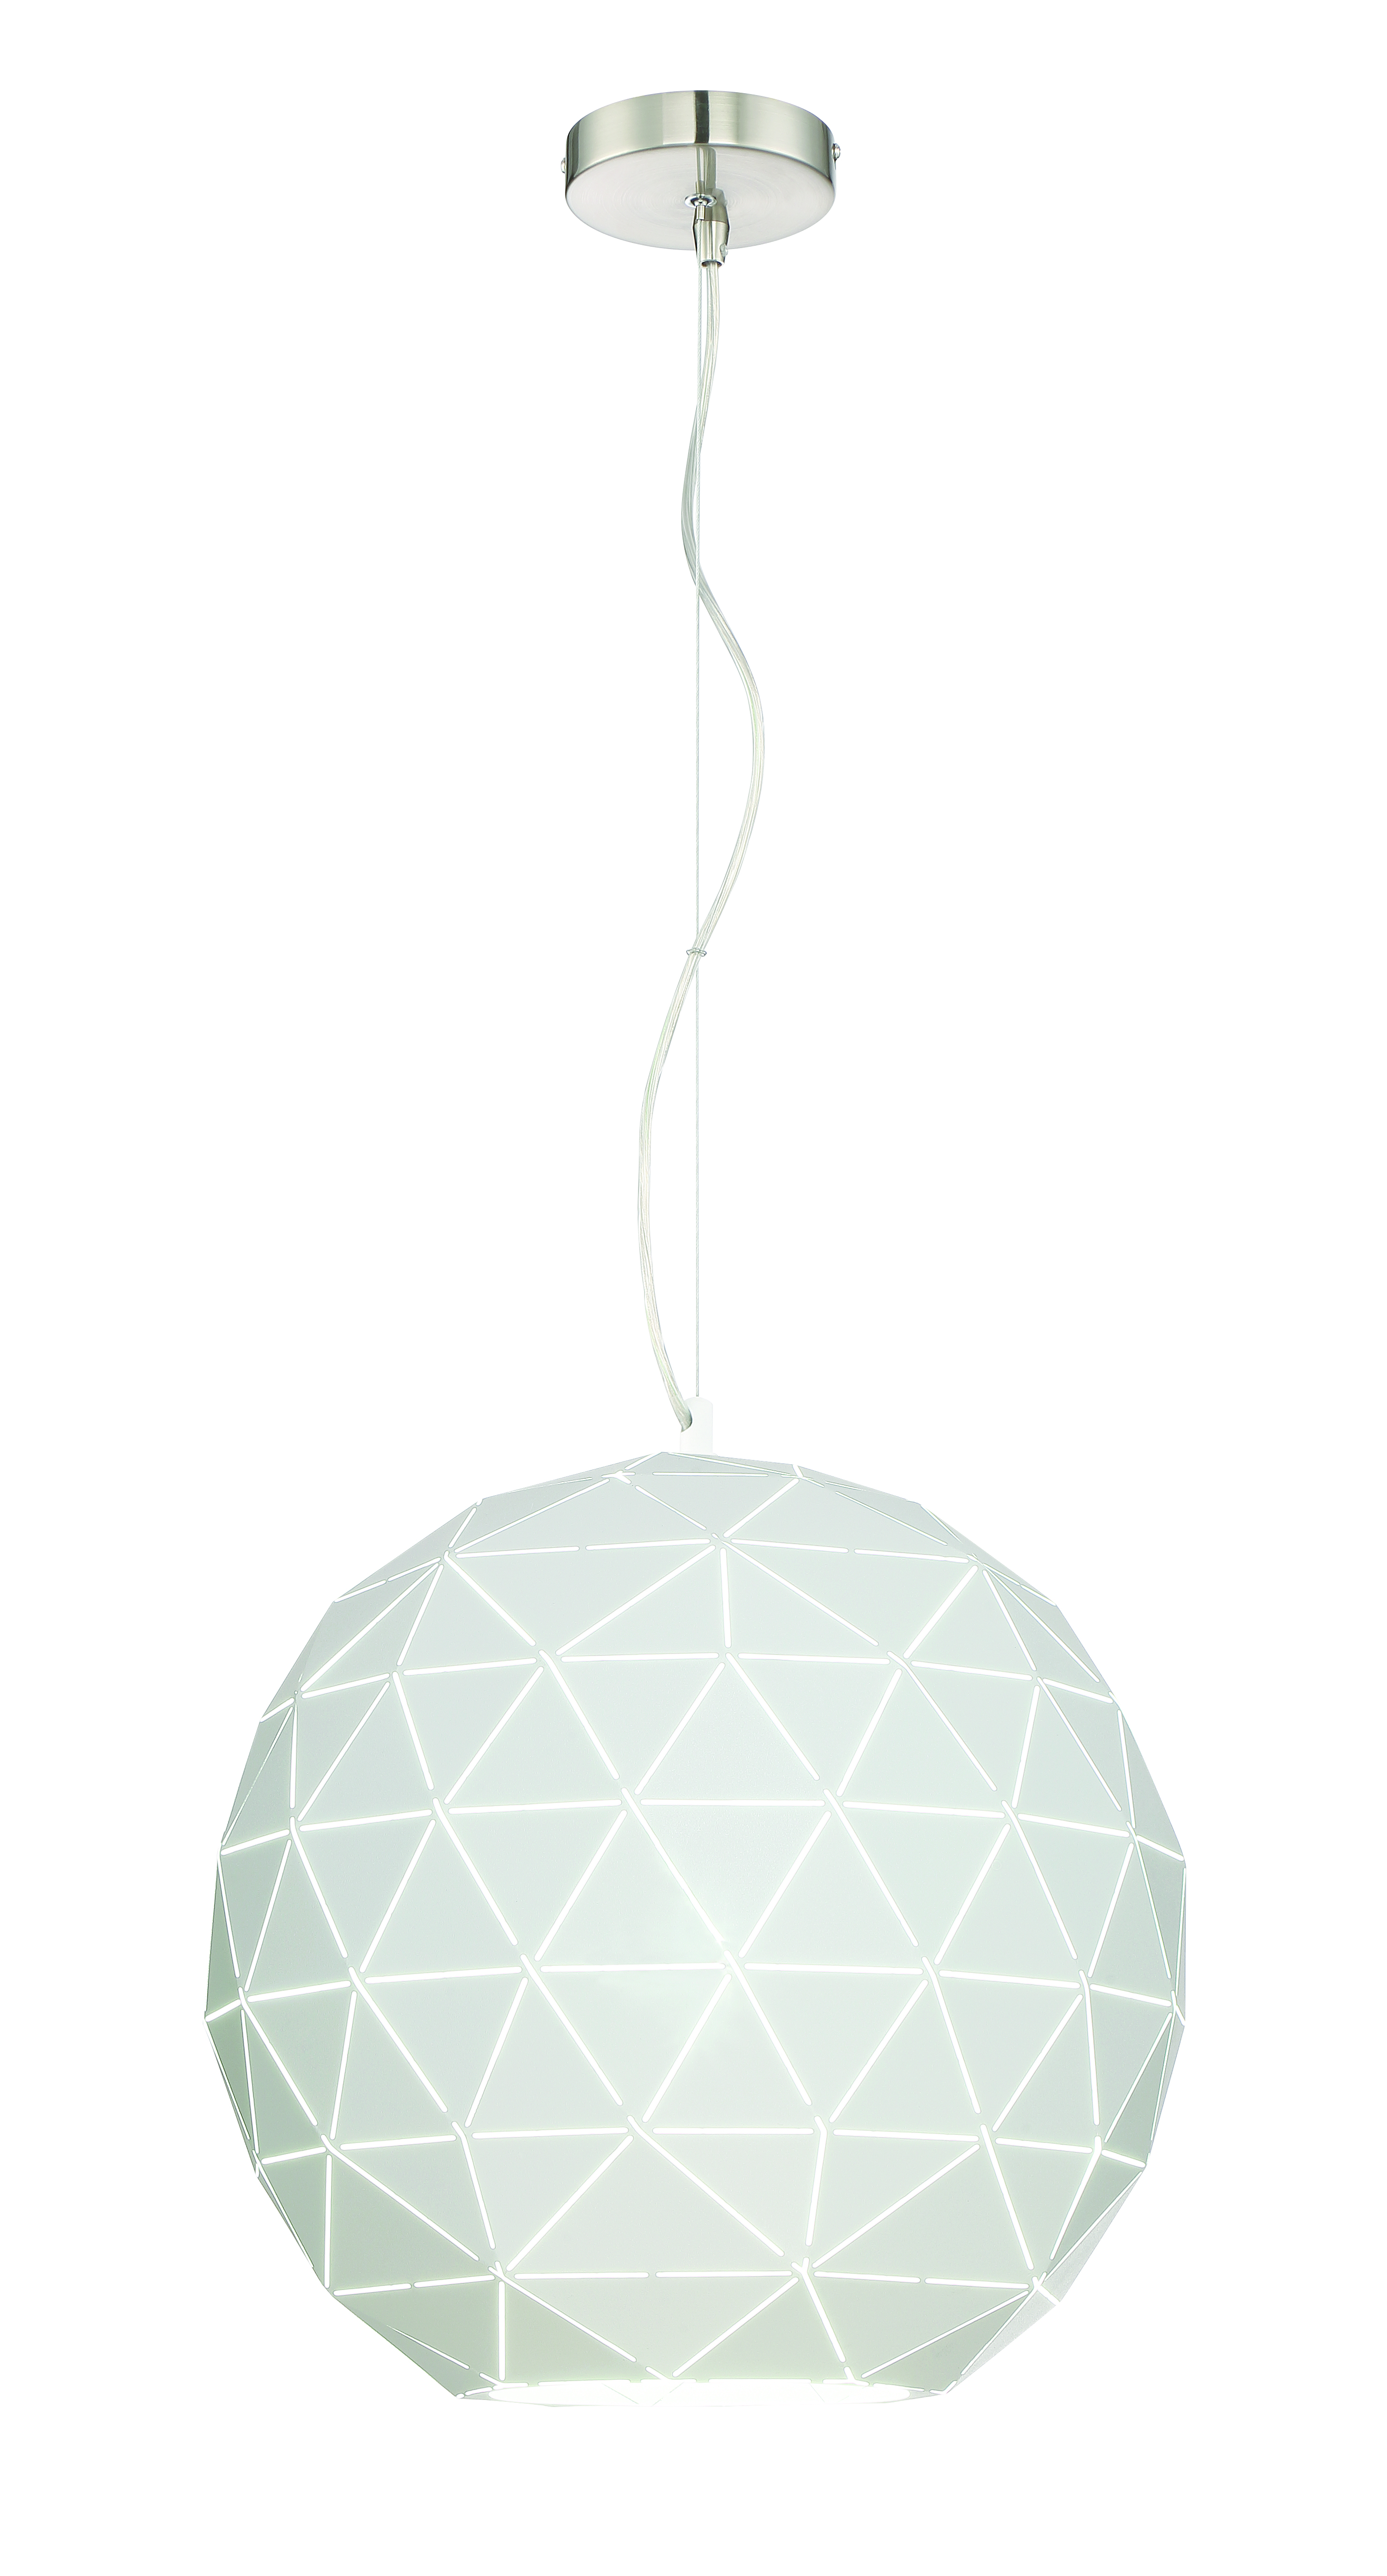 Pandora pendant with a white laser-cut shade from Lite Source